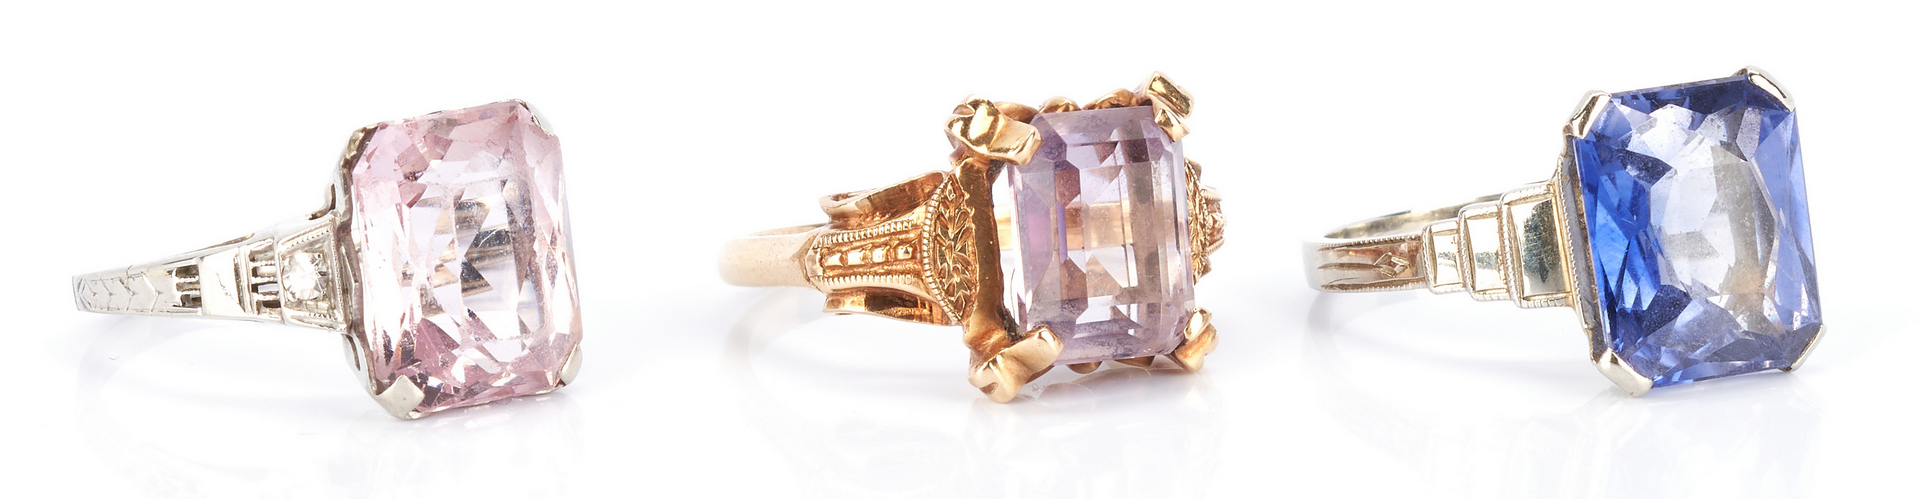 Lot 929: 3 Gold Rings with Gemstones